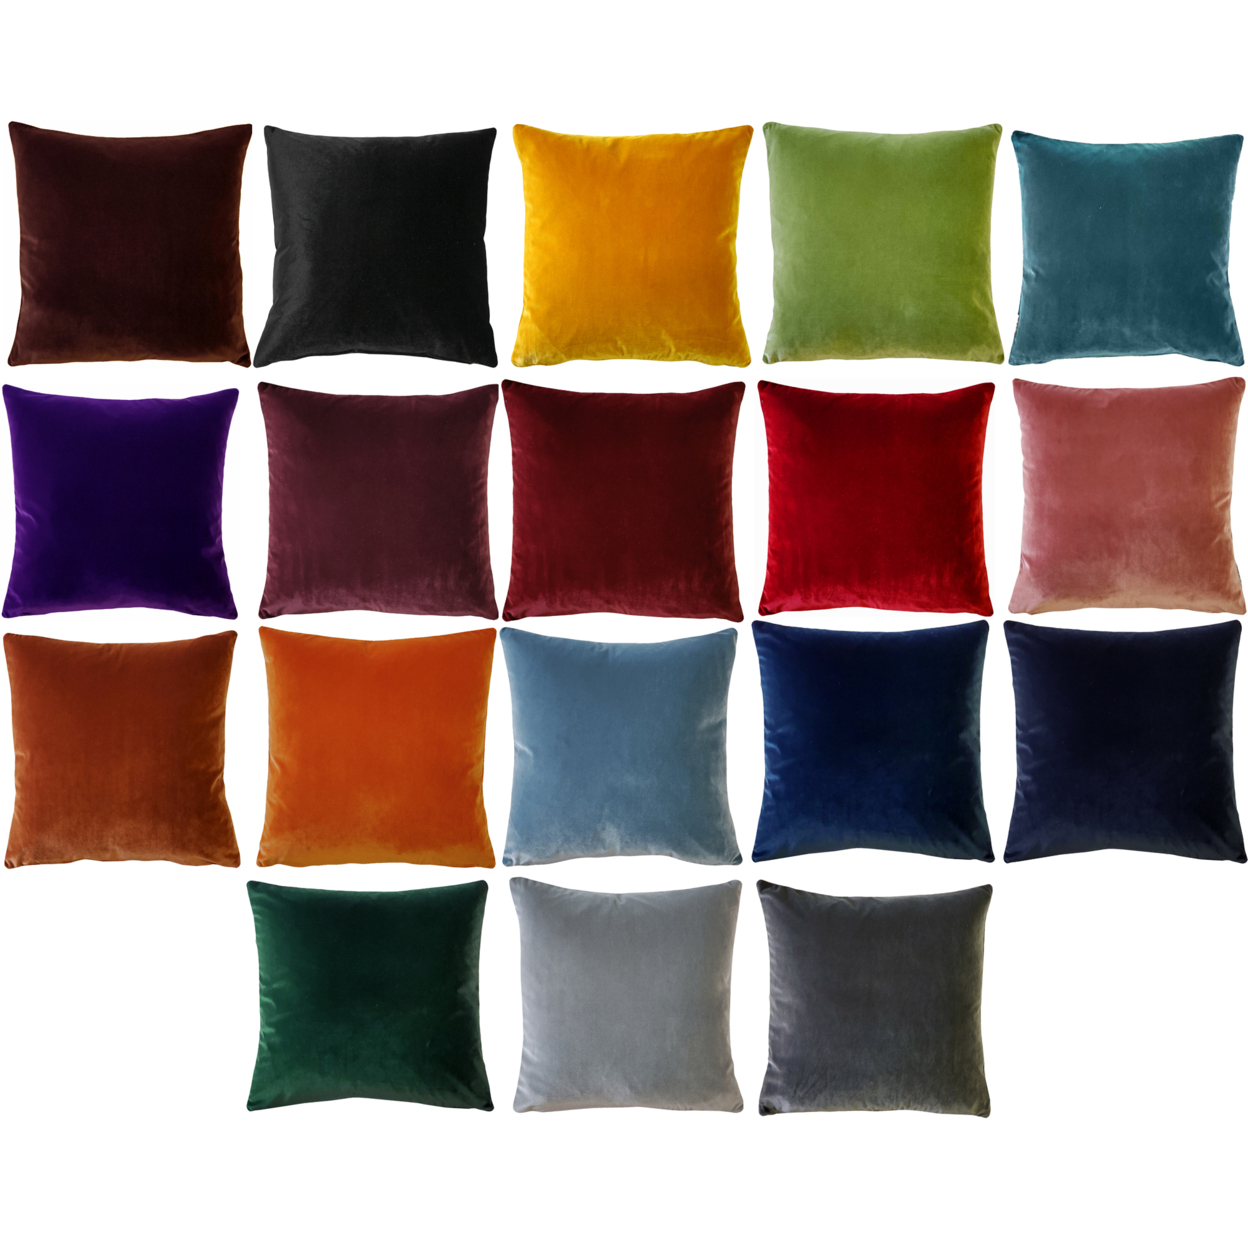 Castello Velvet Throw Pillows, Complete Pillow With Polyfill Pillow Insert (18 Colors, 3 Sizes) - Purple, 12x20